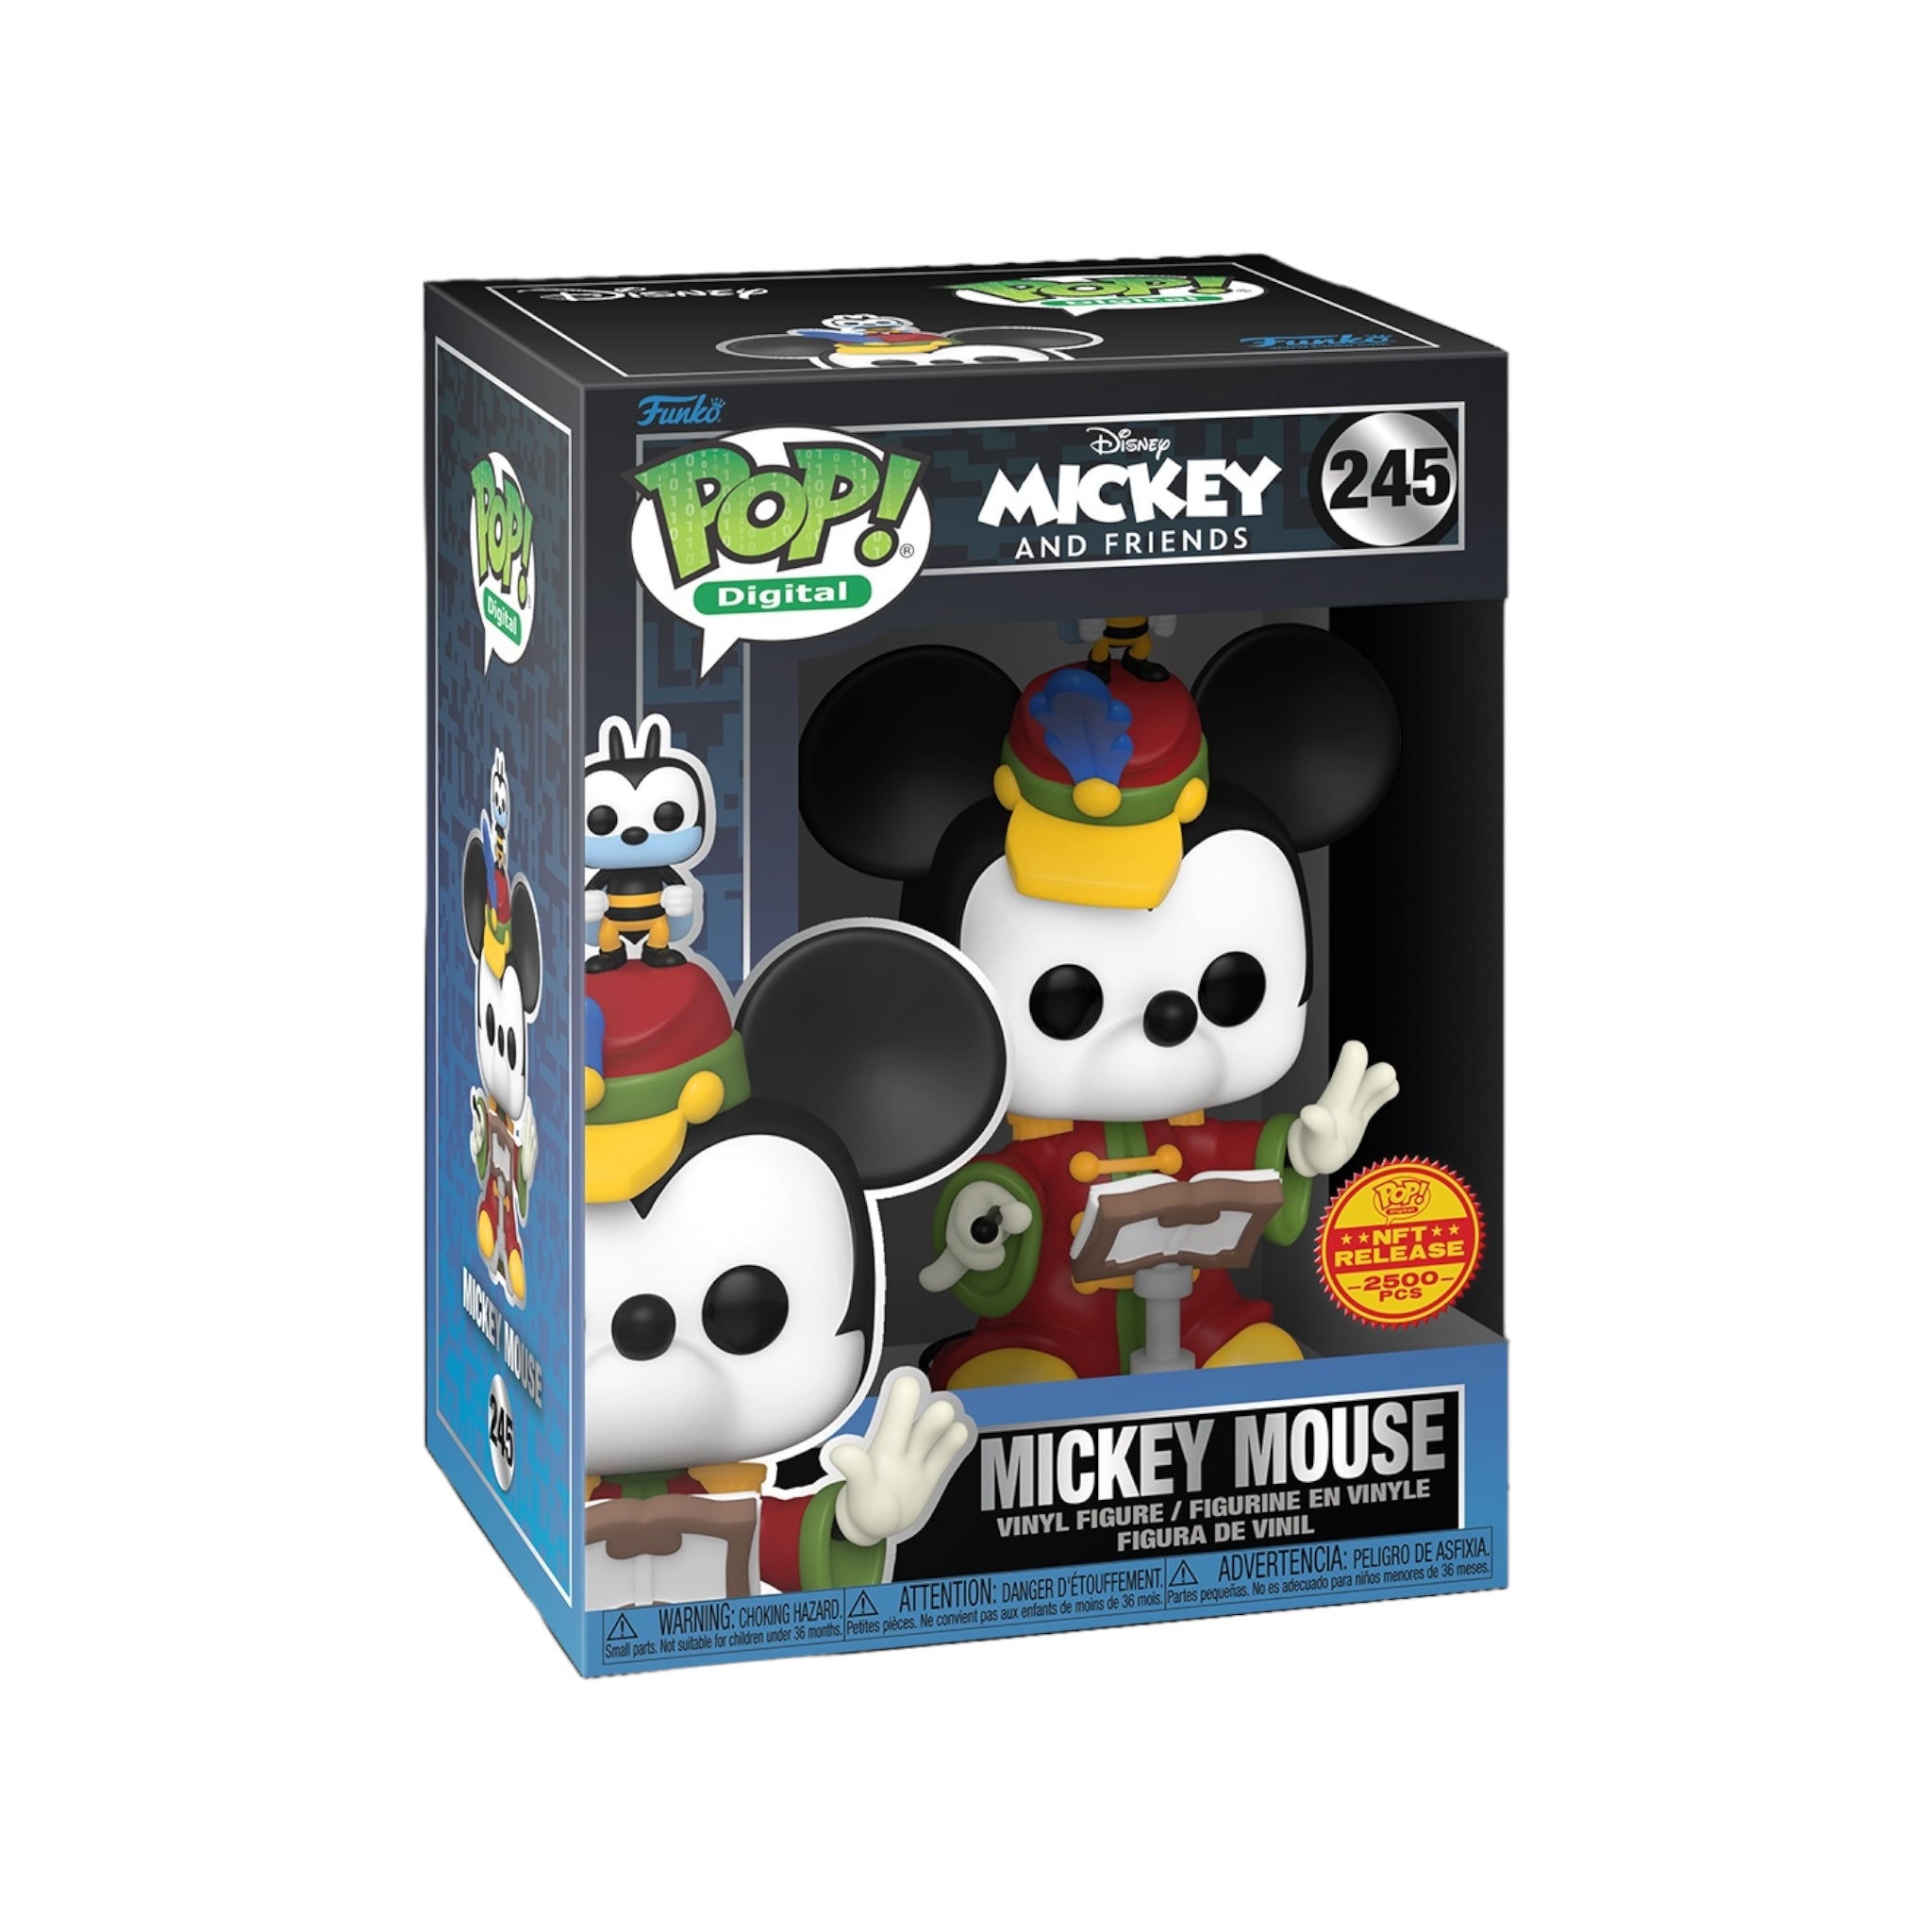 Mickey Mouse #245 Funko Pop! - Mickey and Friends - NFT Release LE2500 Pcs